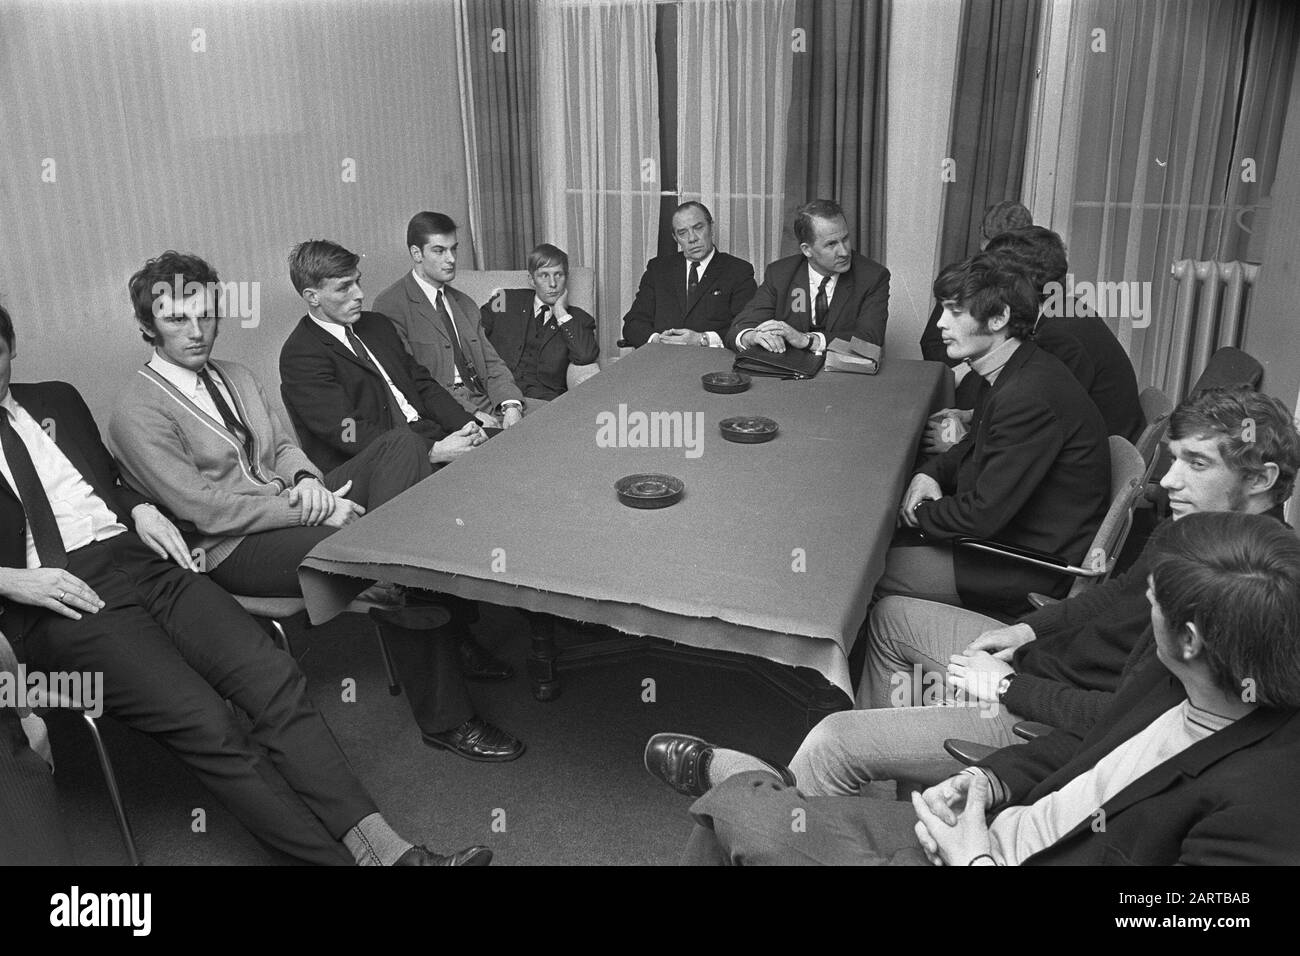 Amateur footballers meet in Utrecht about whether or not to go to Italy  Players during the meeting Annotation: Saturday gamateurs do not want to go to Italy for a game, for reasons of principle, on Sunday to play. The KNVB board section on Saturday gamateurs adheres to principles of principle. Date: 23 april 1970 Location: Utrecht (prov), Utrecht (city) Keywords: amateur sports, meetings, football players Stock Photo